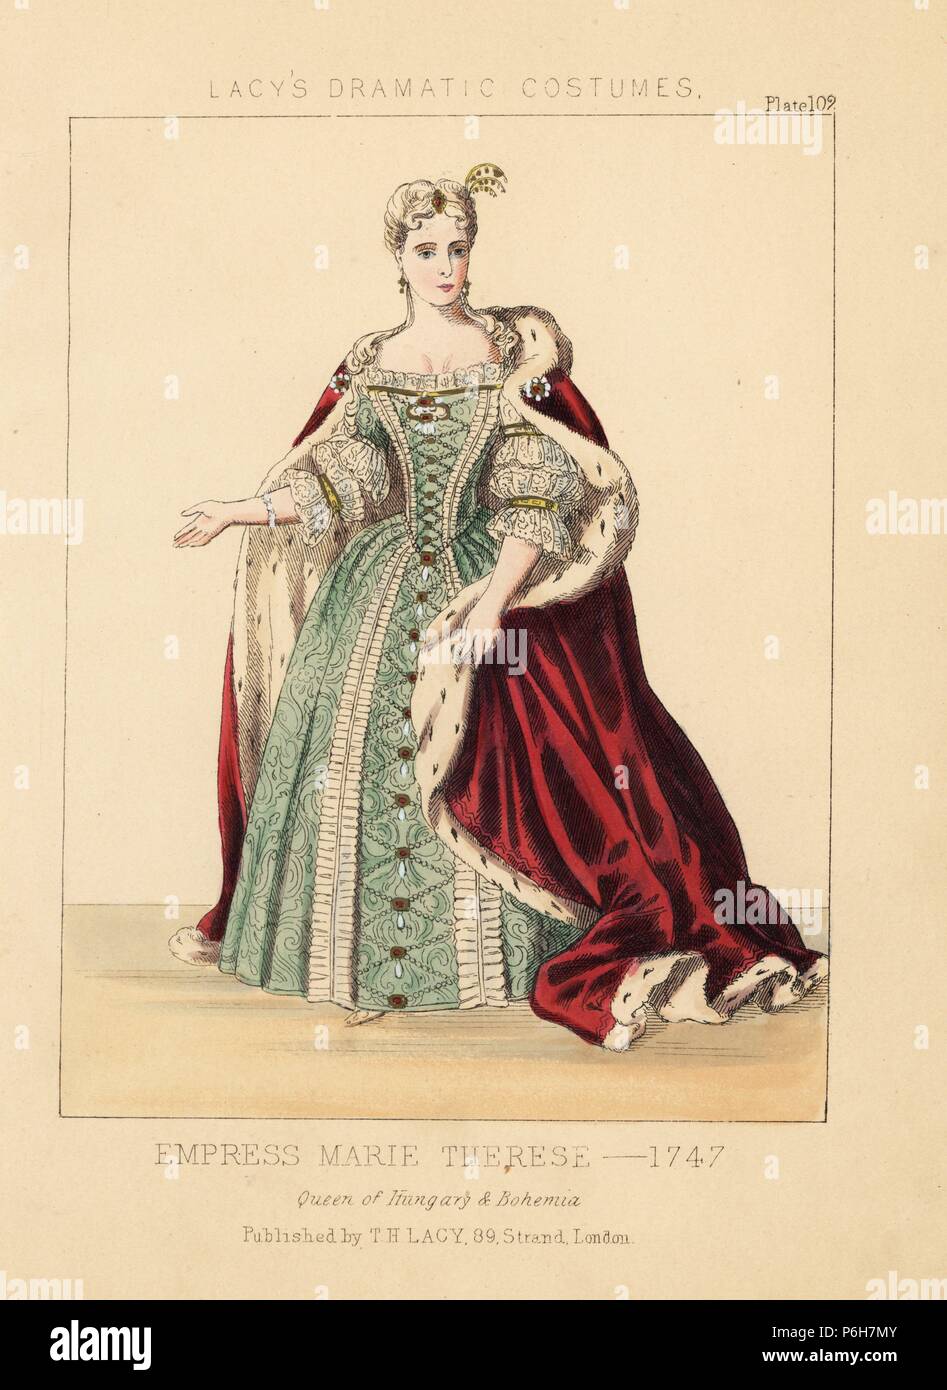 Empress Maria Theresa, Queen of Hungary and Bohemia, 1747. She wears a crimson cape lined with ermine over a green dress with lace sleeves. Handcoloured lithograph from Thomas Hailes Lacy's 'Female Costumes Historical, National and Dramatic in 200 Plates,' London, 1865. Lacy (1809-1873) was a British actor, playwright, theatrical manager and publisher. Stock Photo